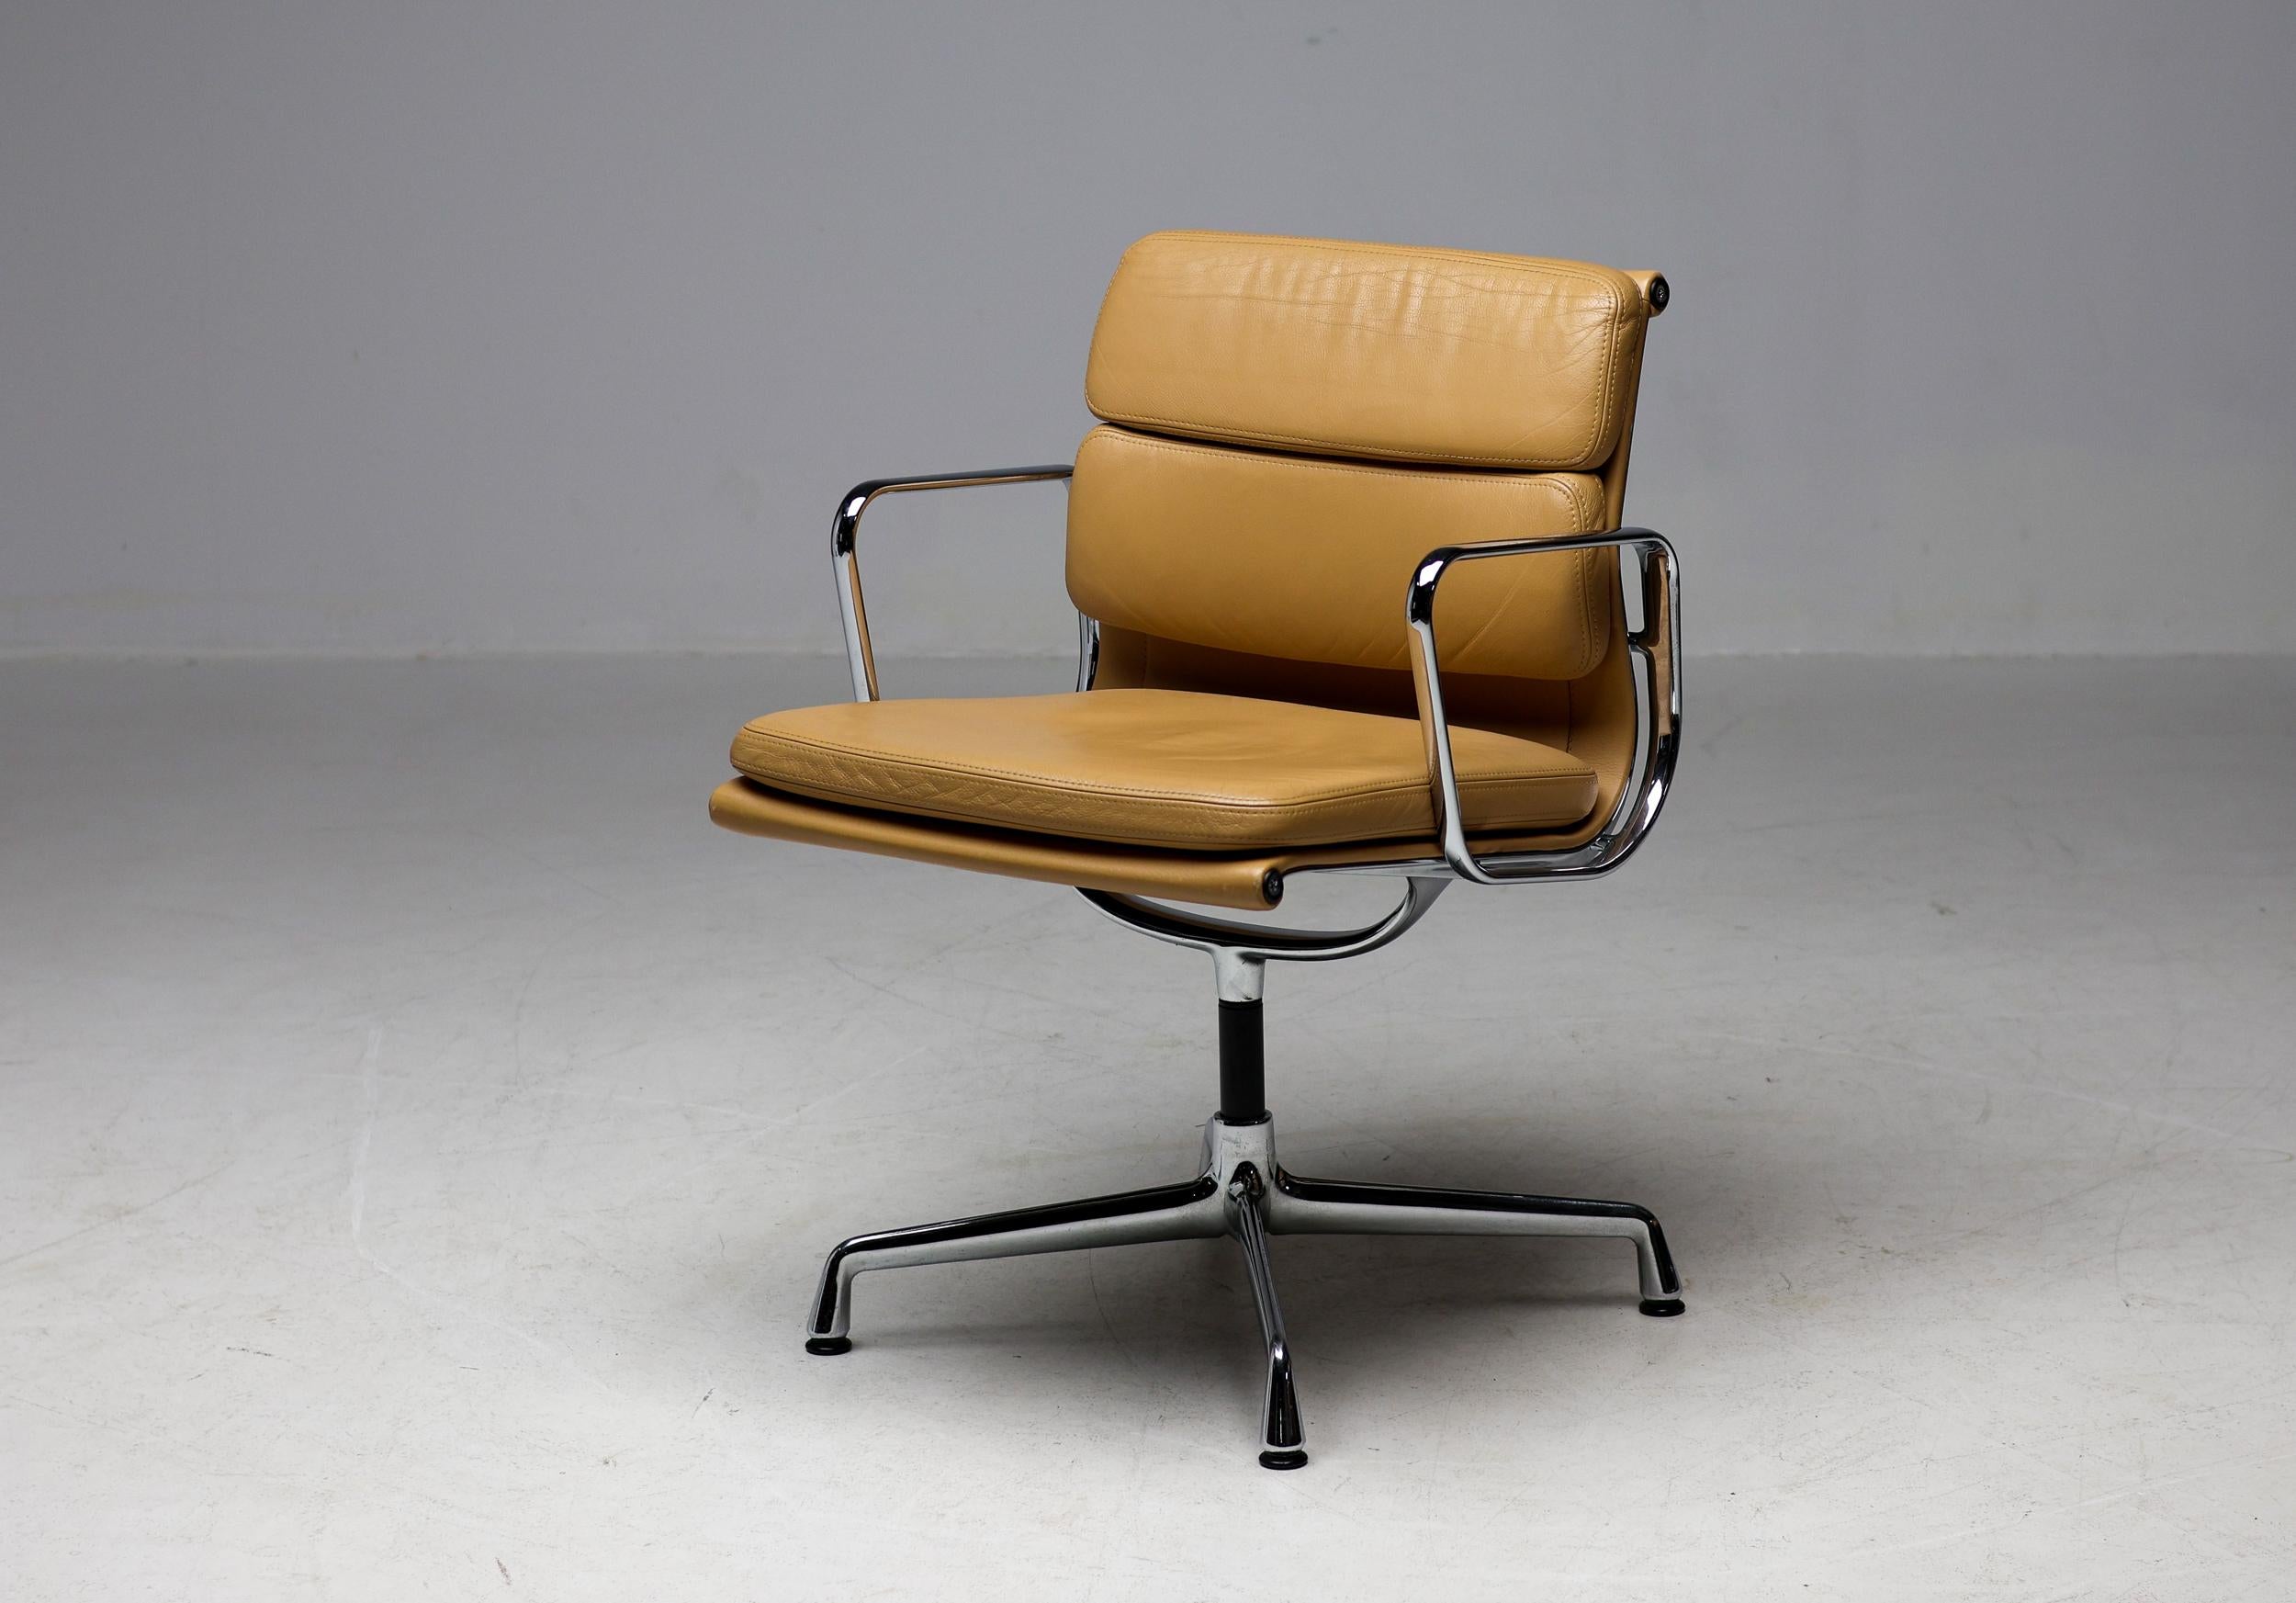 The Aluminum Group chairs by Charles & Ray Eames are among the most important designs of the 20th Century. Their original design from the 1950s is still relevant today, giving interiors all over the world a touch of modern elegance.   
On offer we